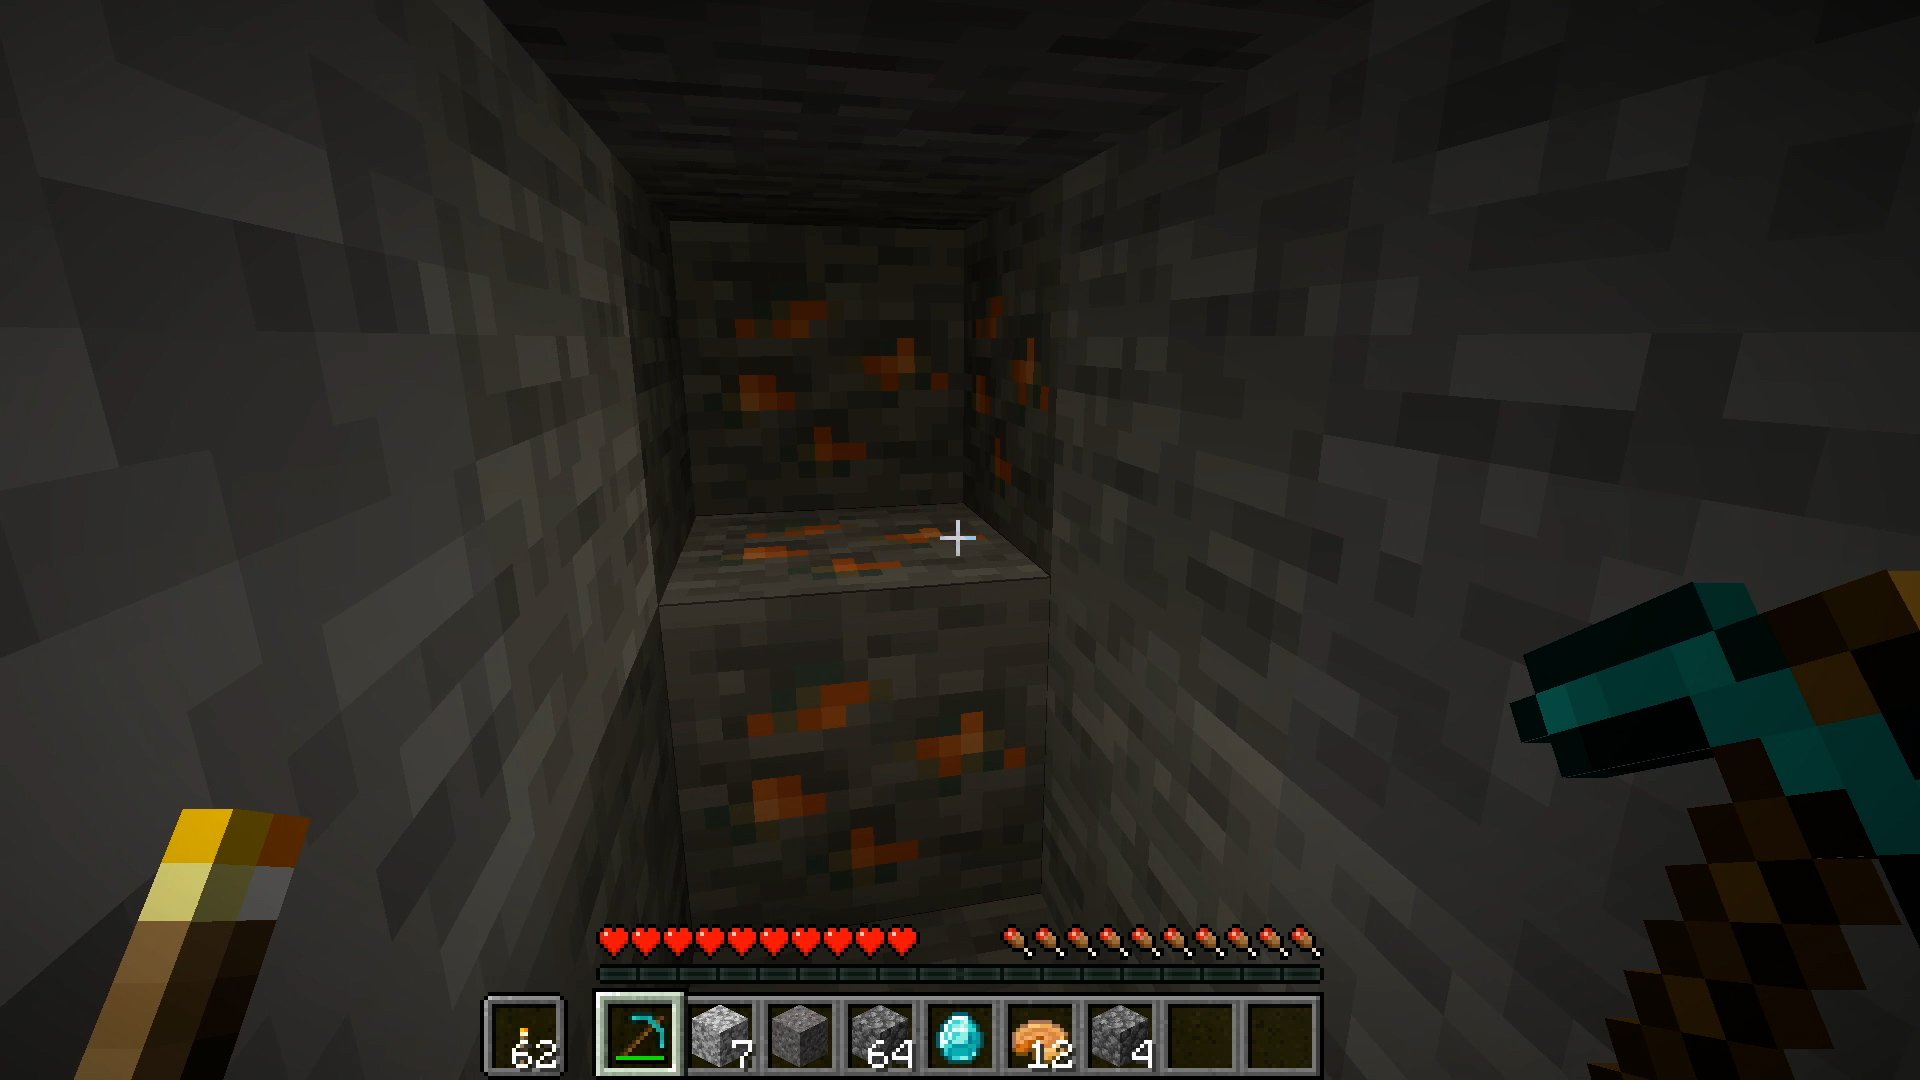 Minecraft Caves and Cliffs Update Image